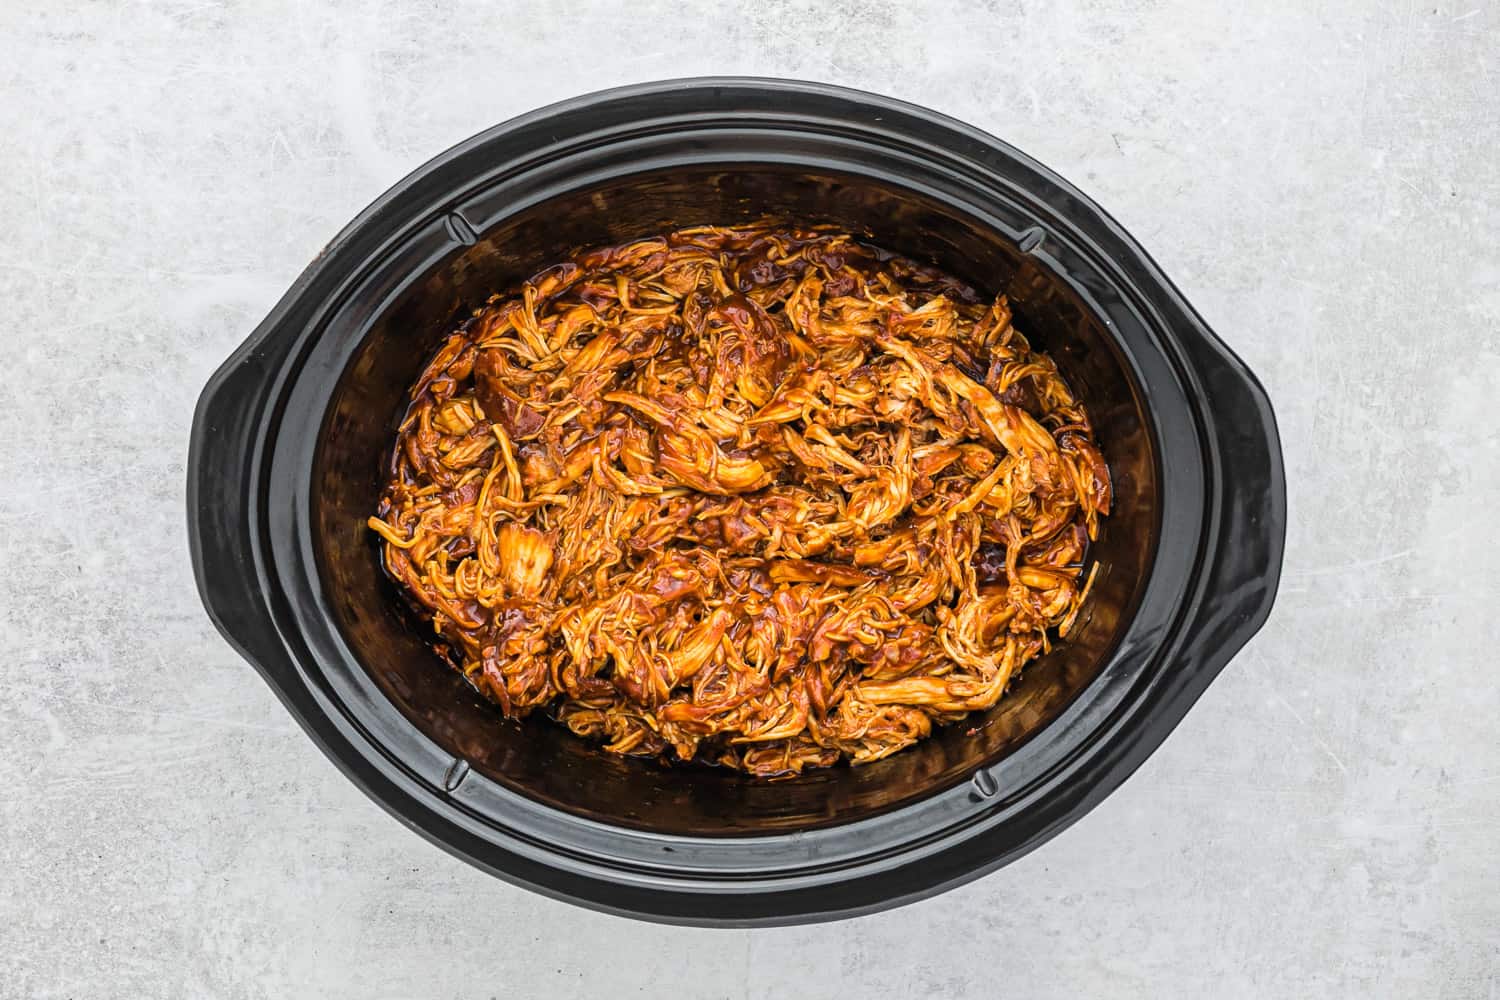 Shredded bbq chicken in a slow cooker.